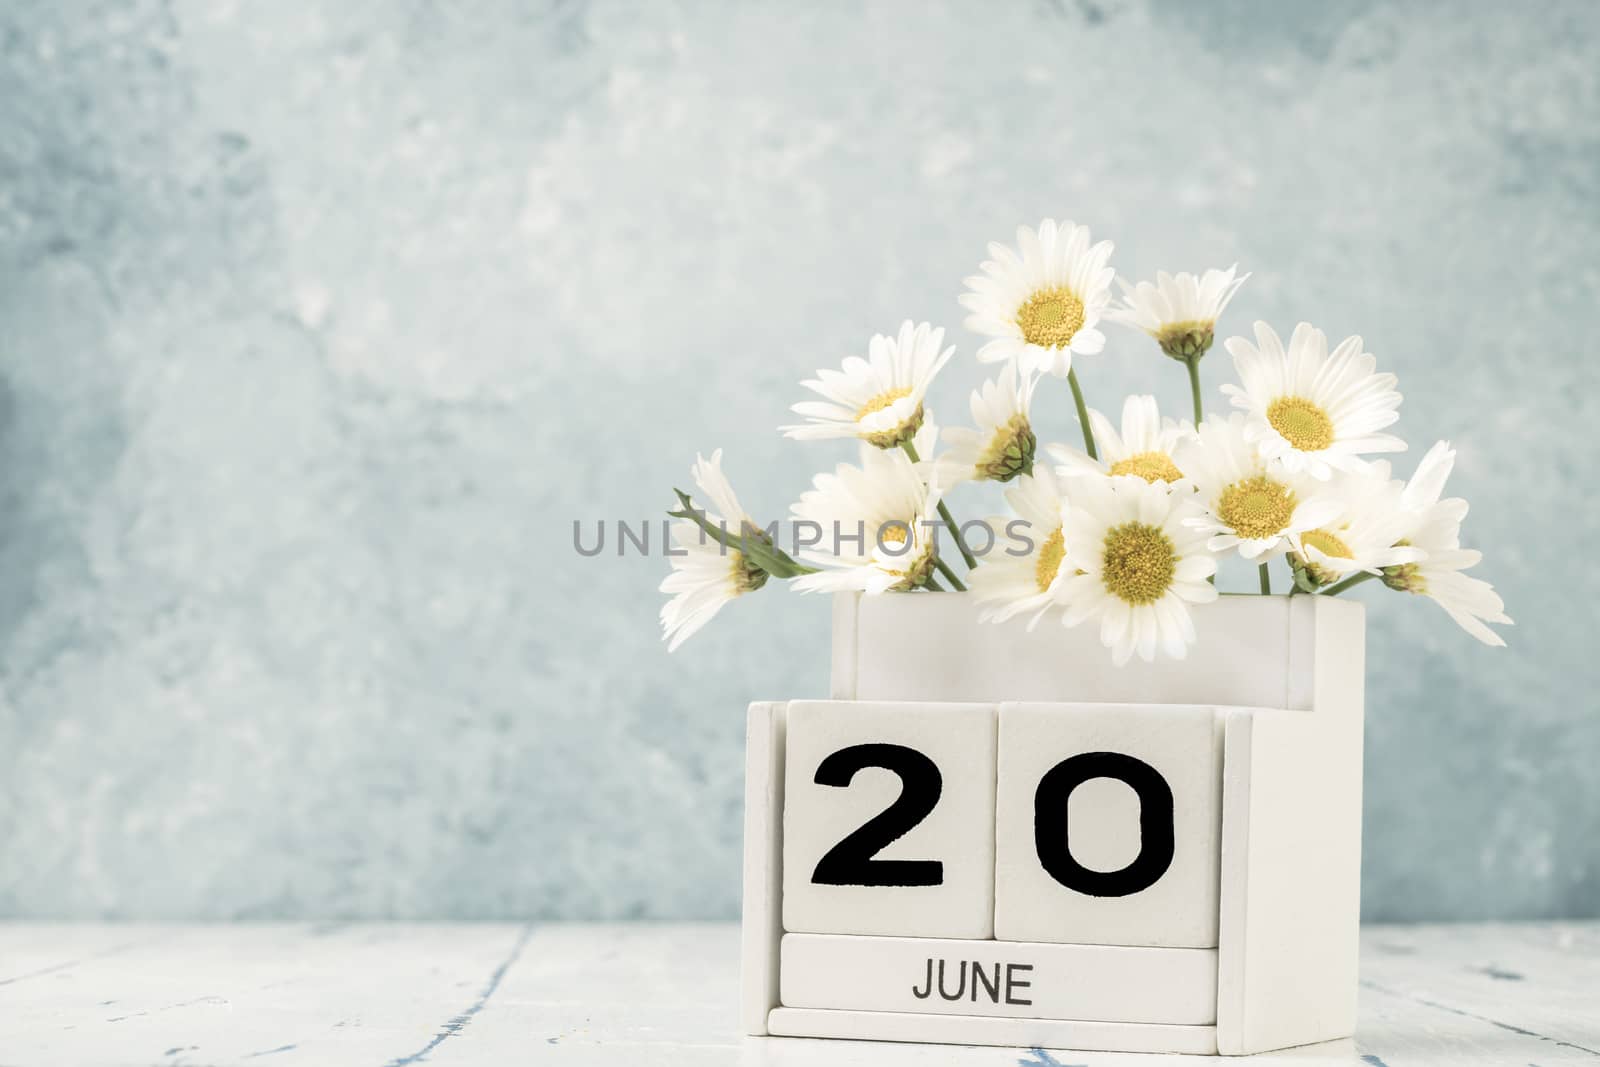 cube calendar for june decorated with daisy flowers by bernanamoglu